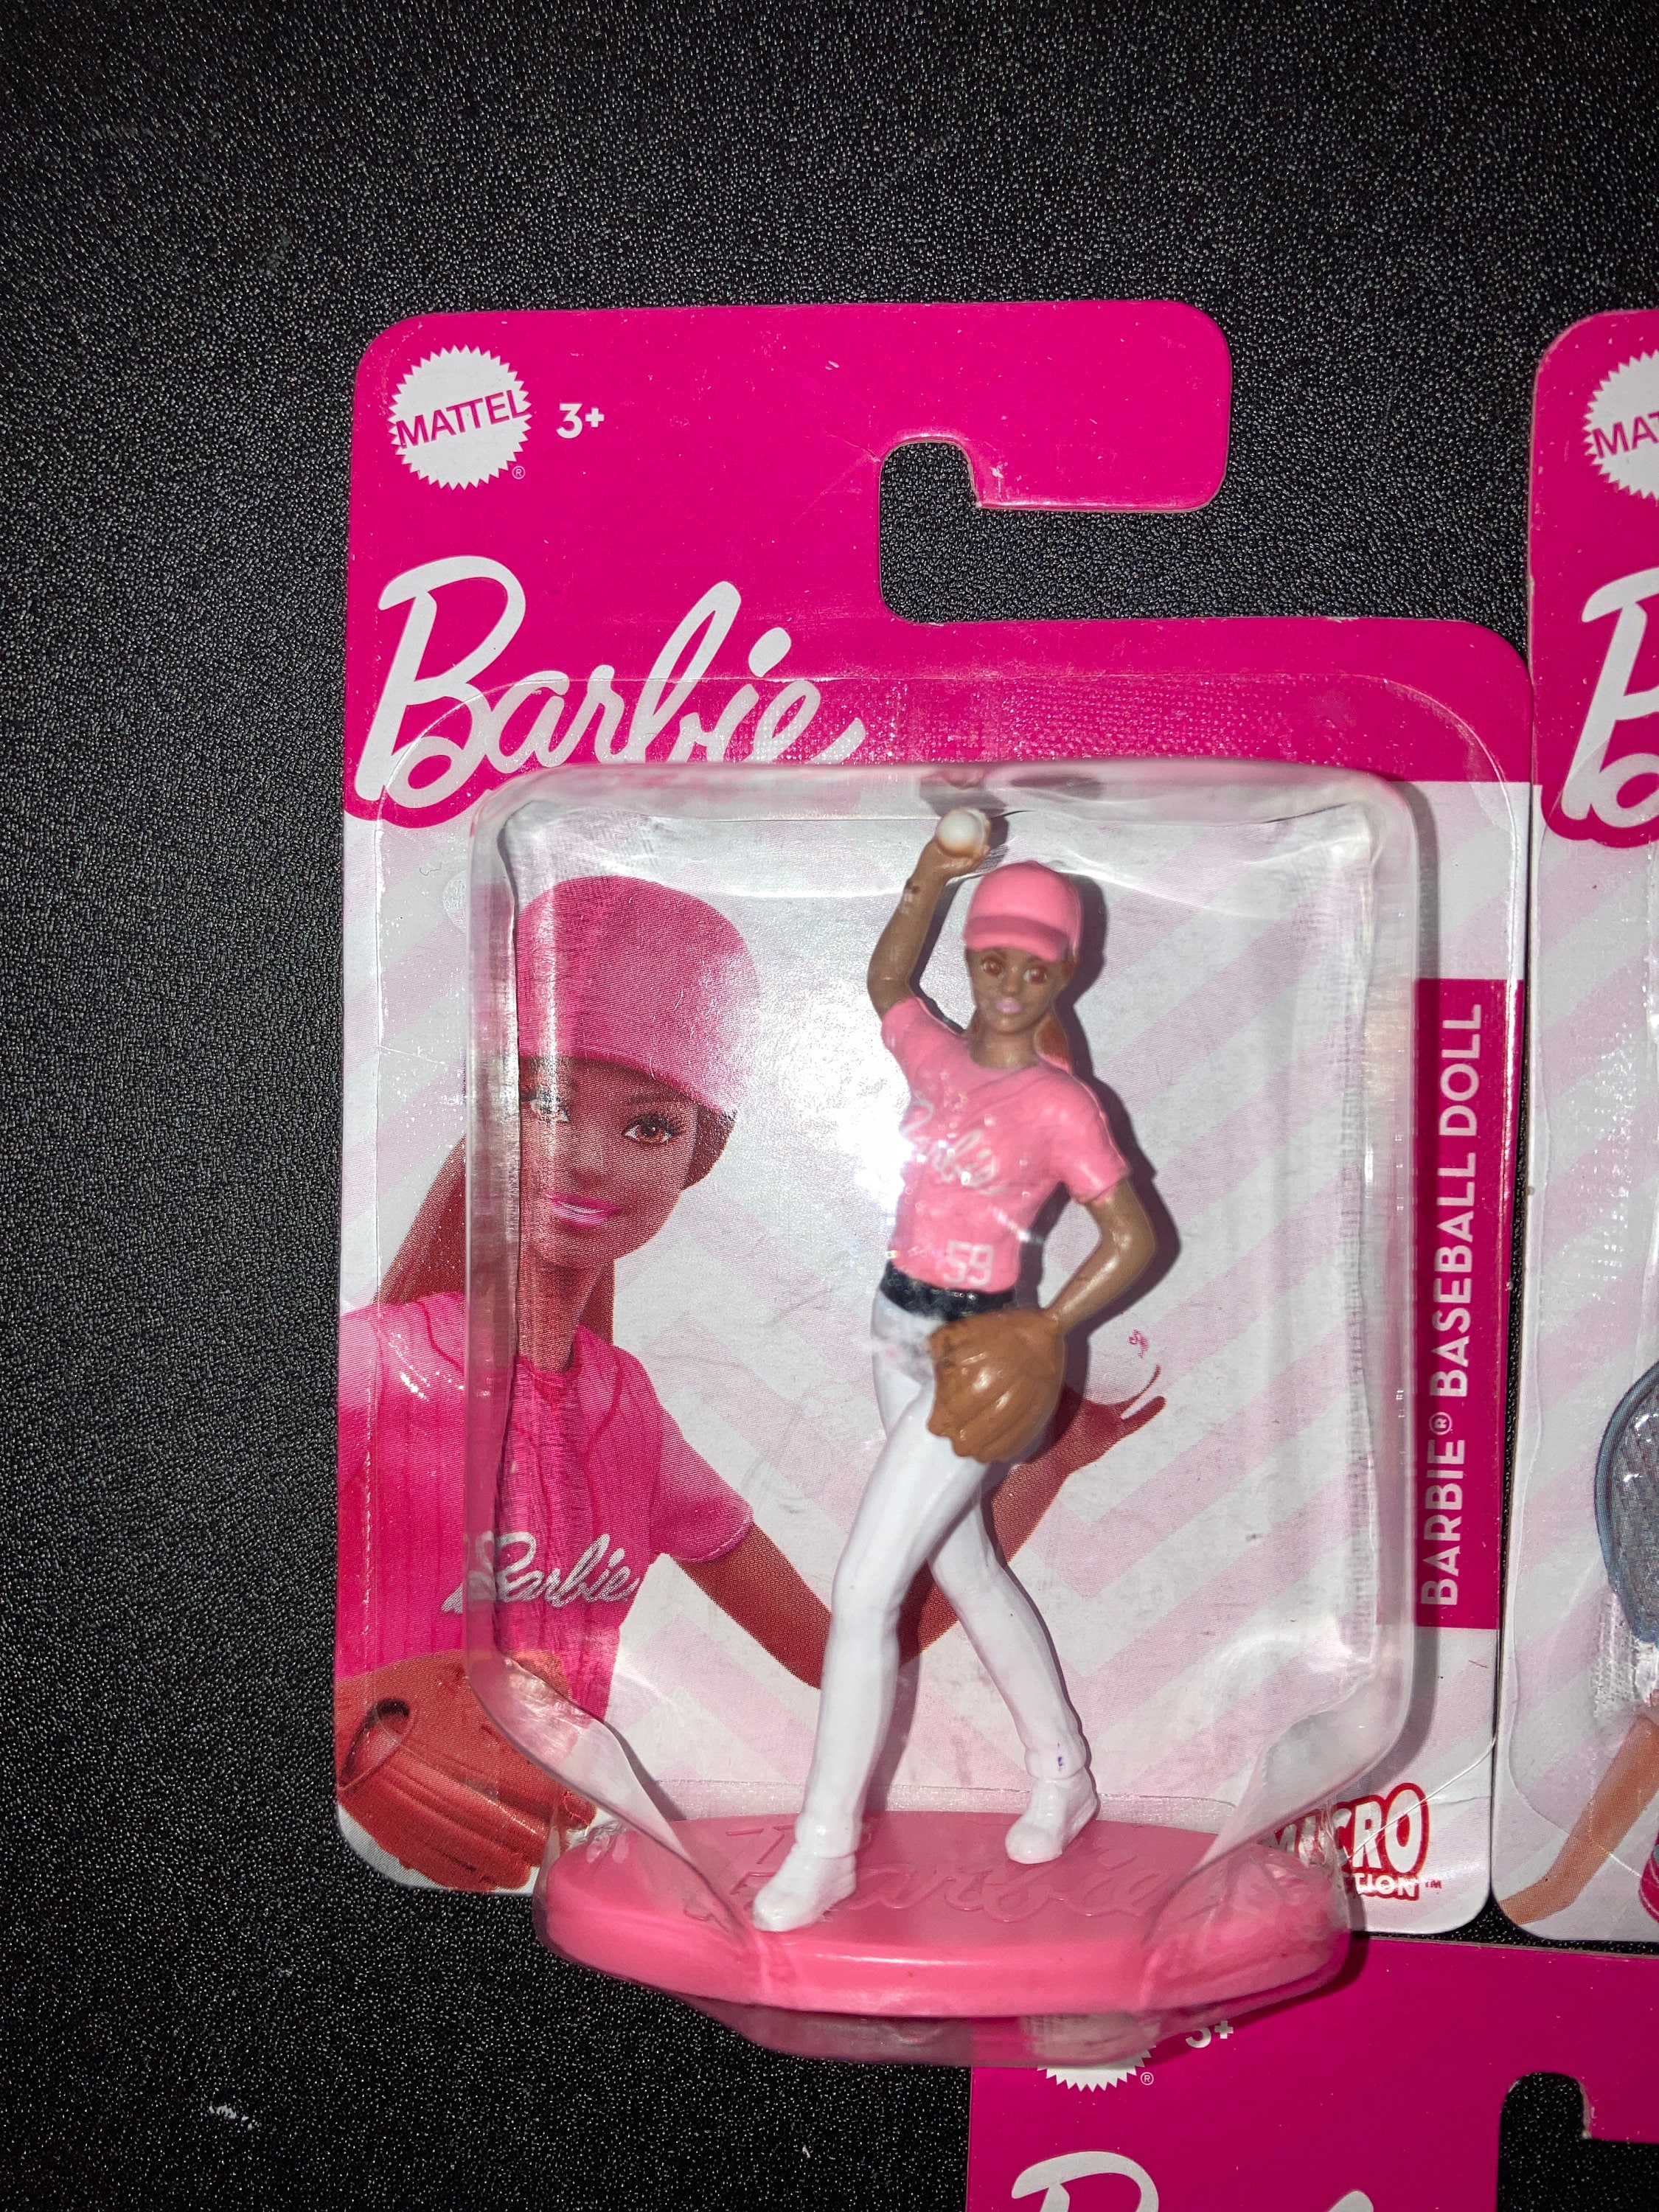 Mattel Micro Collection Barbie Sports Figures Set of 5 New Miniatures Party  Favors Girls Collectible Toys 